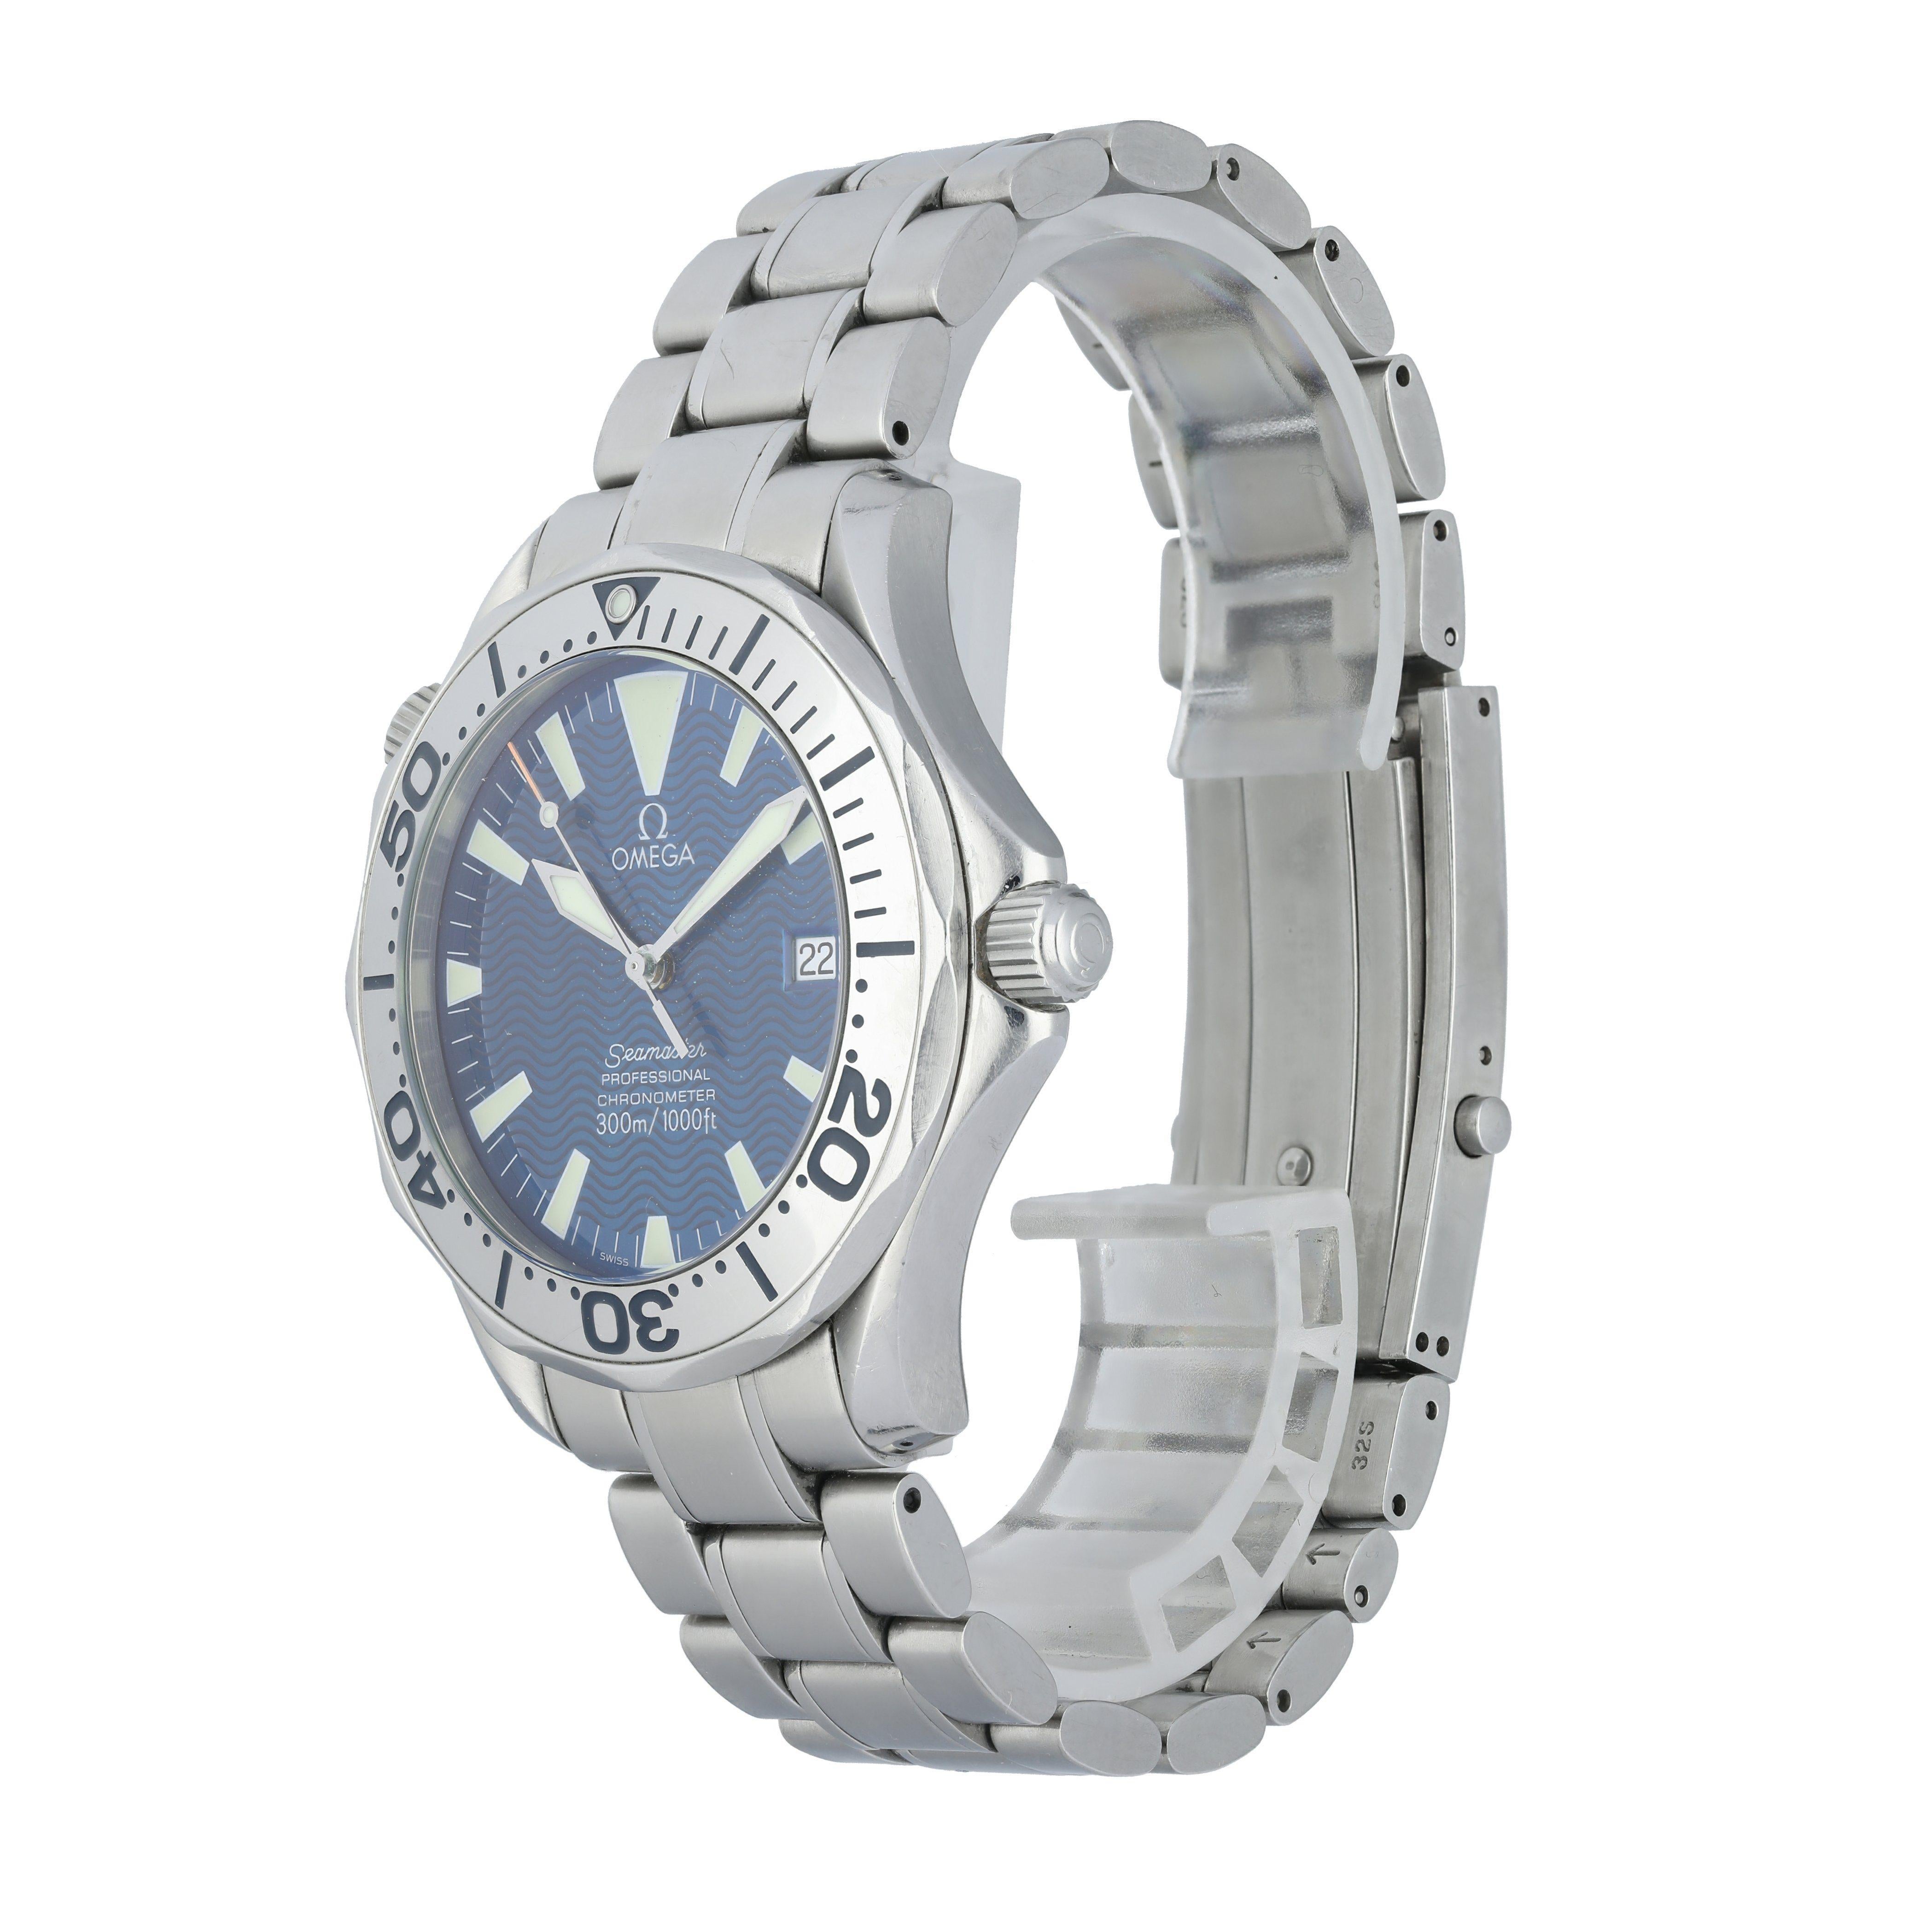 Omega Seamaster Professional 2255.80.00 Men's Watch. 
Stainless Steel 41 mm case, Unidirectional Stainless Steel bezel with engraved markers. 
Electric Blue dial with luminous hands and hour markers. Date display at 3 o'clock position. 
Stainless